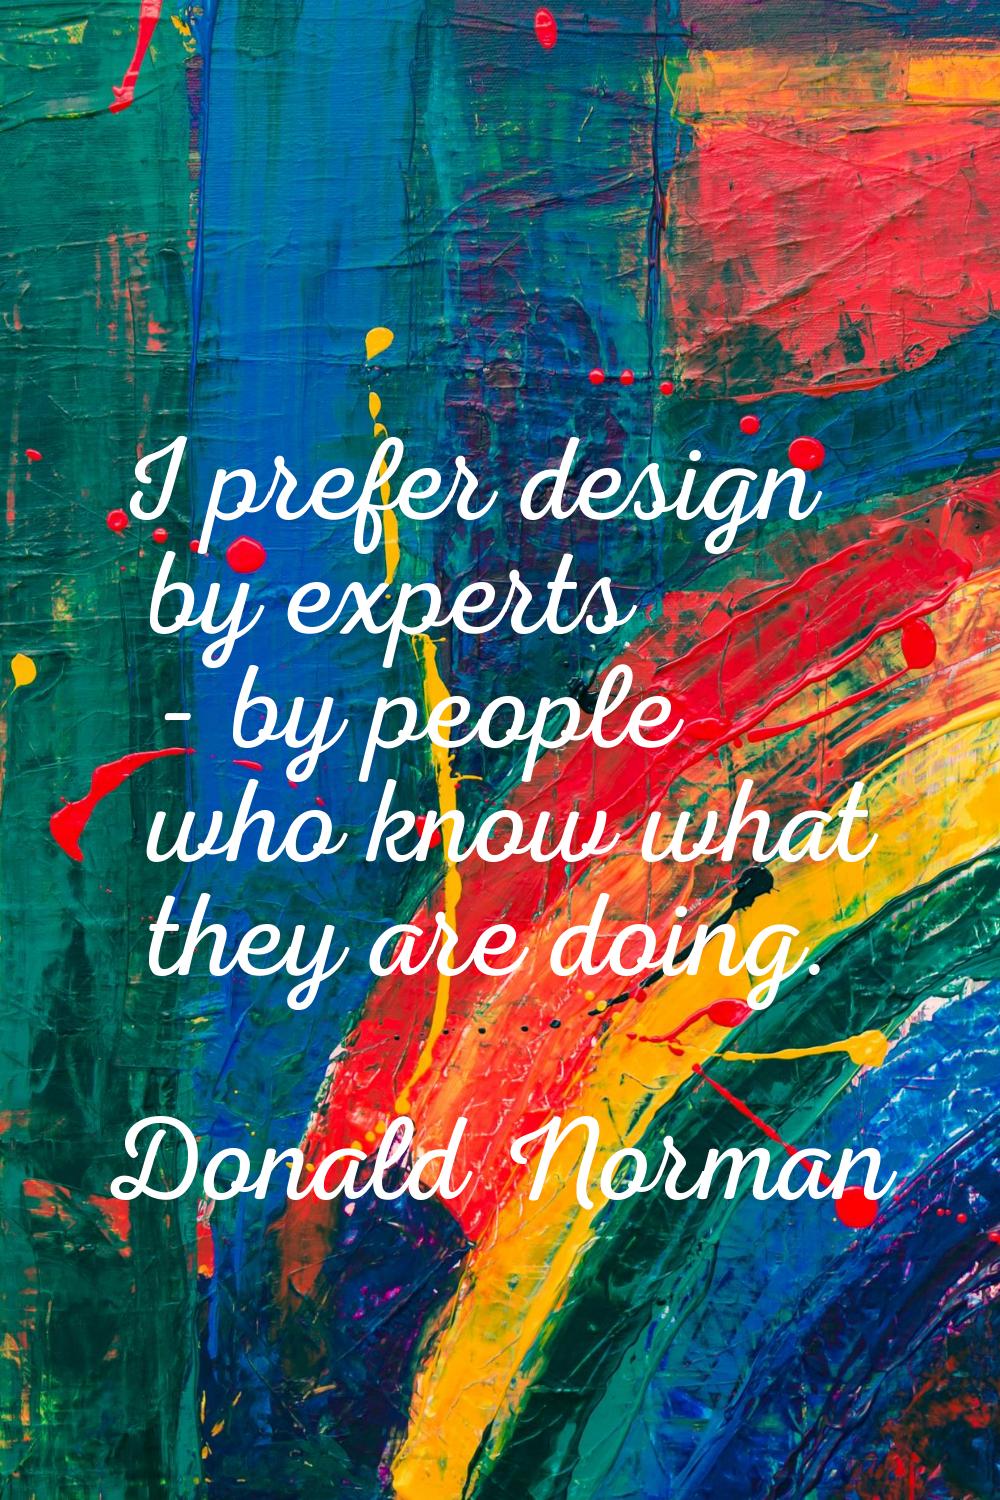 I prefer design by experts - by people who know what they are doing.